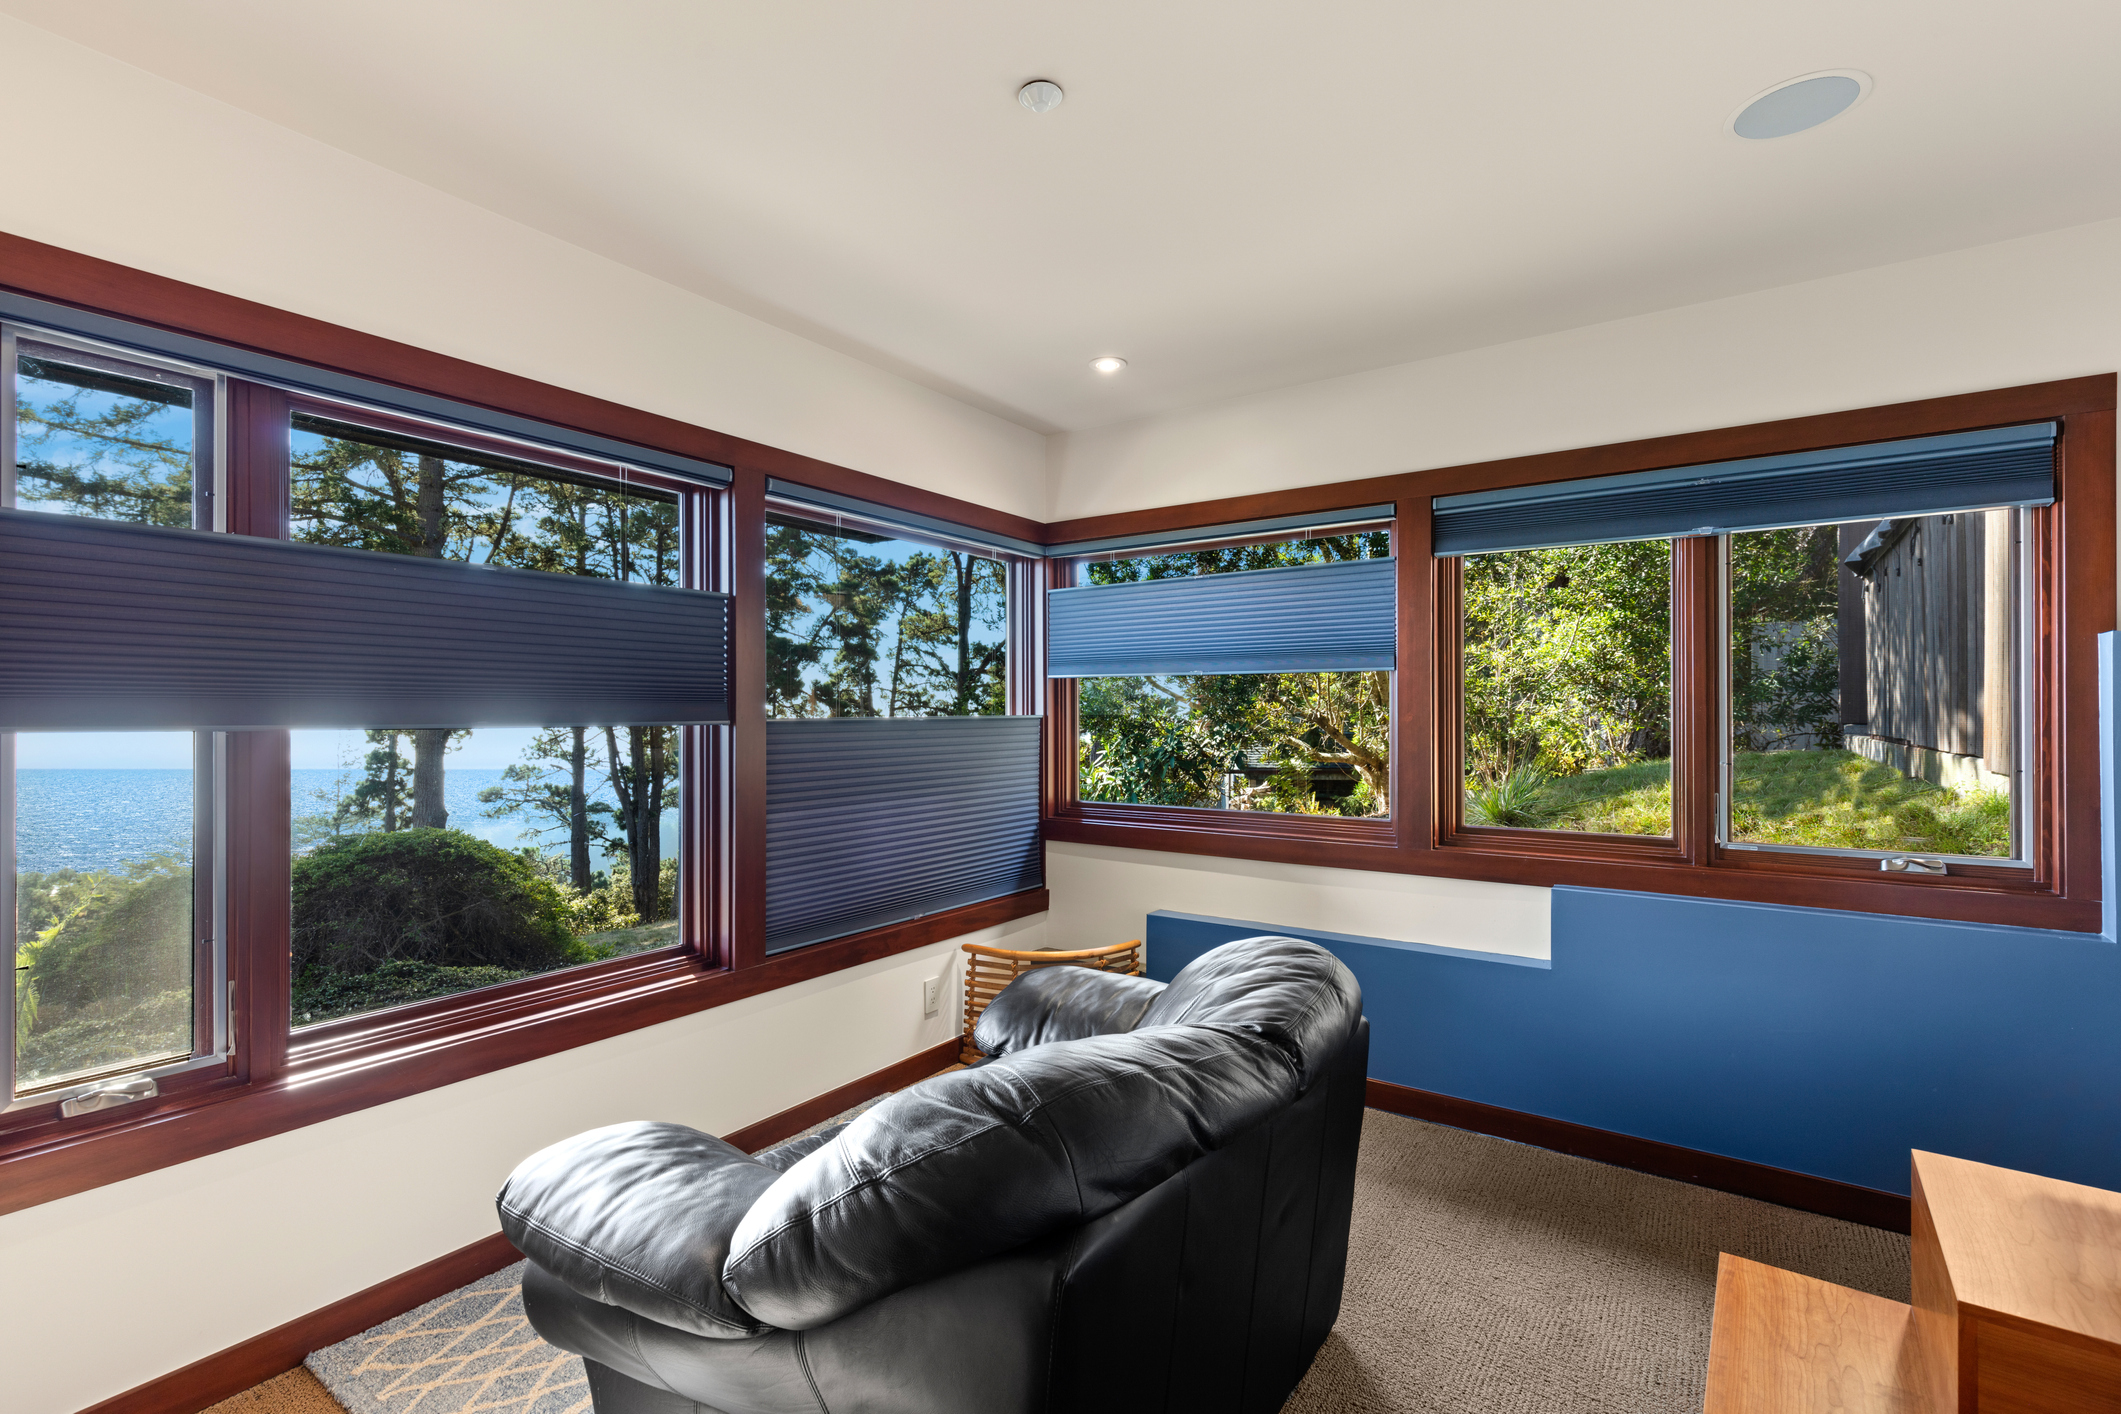 Blinds And Window Treatments Window Coverings In Home With View Of The Ocean